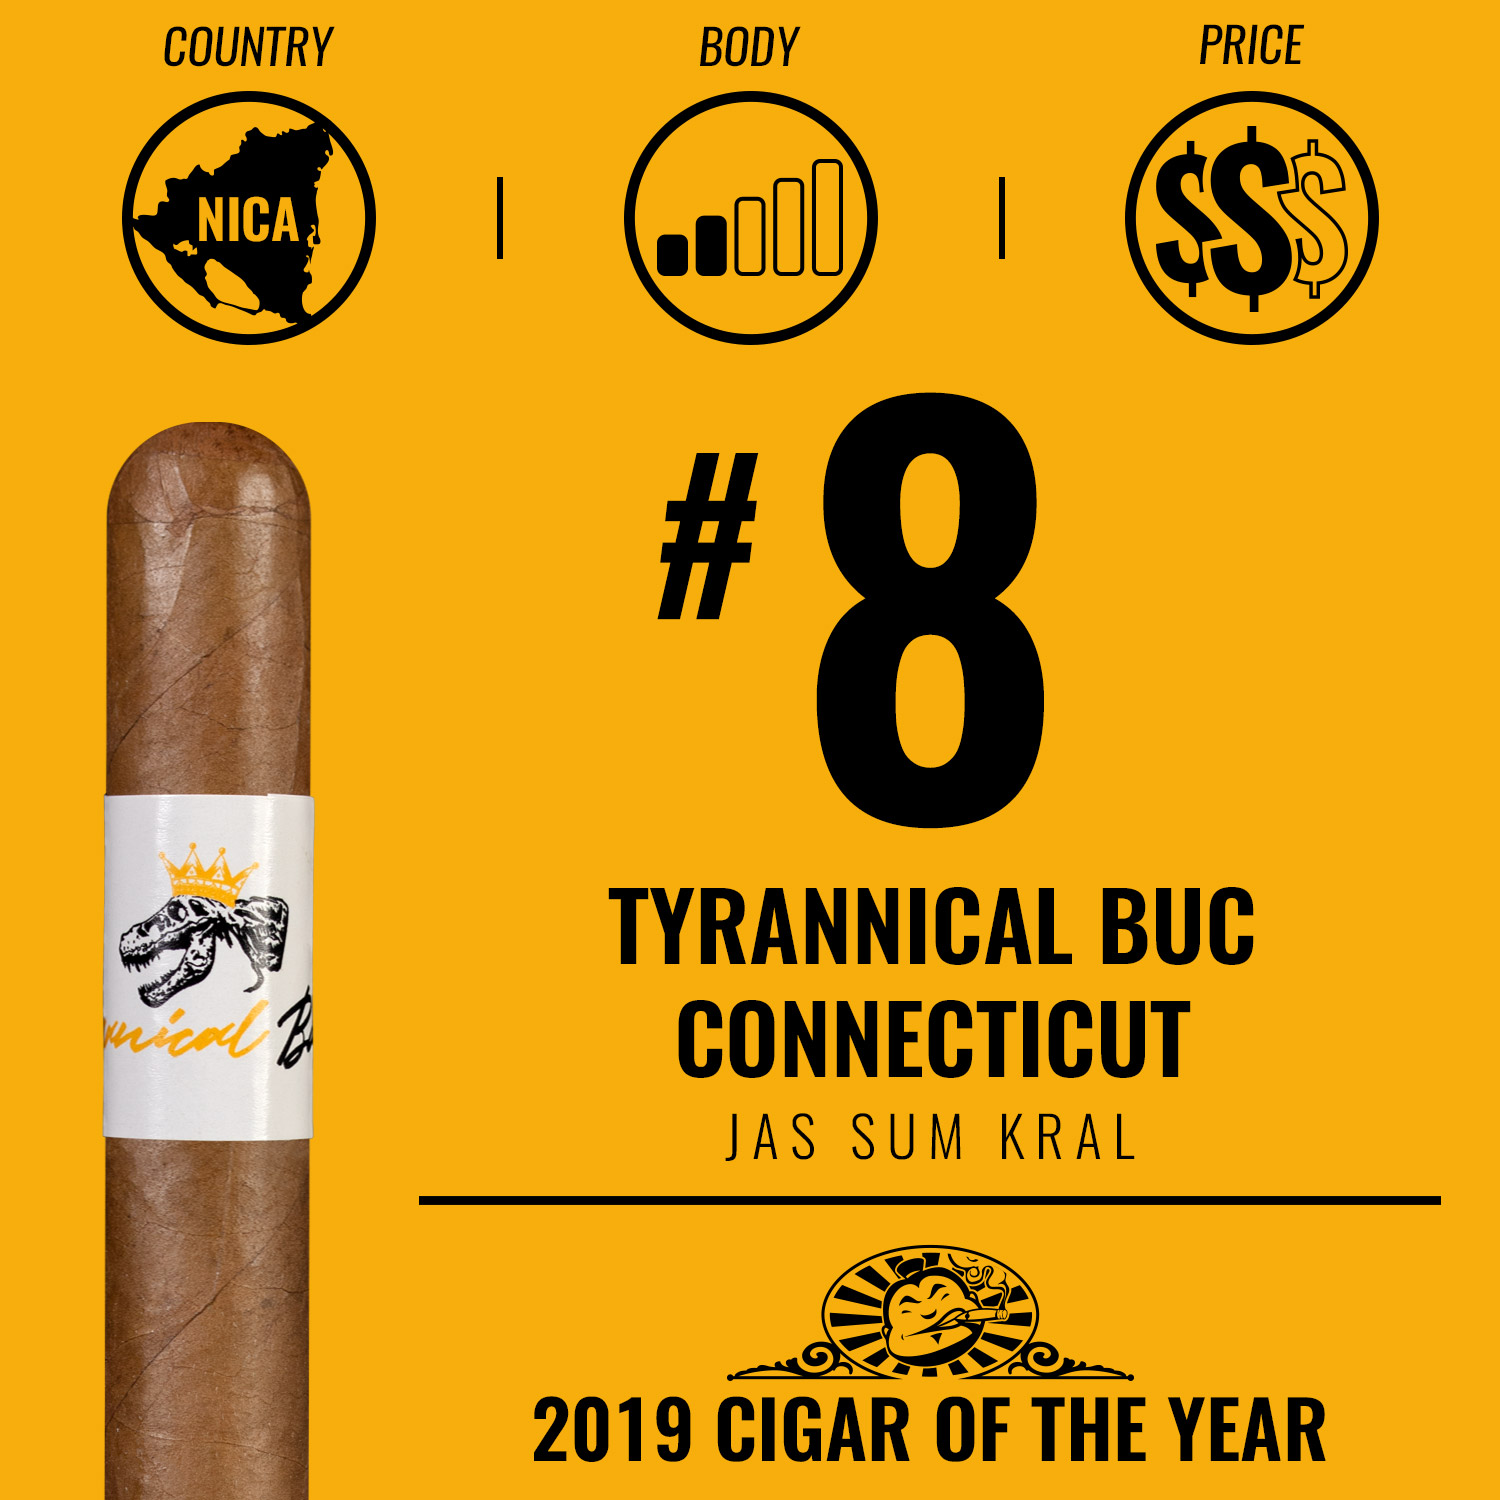 Jas Sum Kral Tyrannical Buc Connecticut No. 8 Cigar of the Year 2019